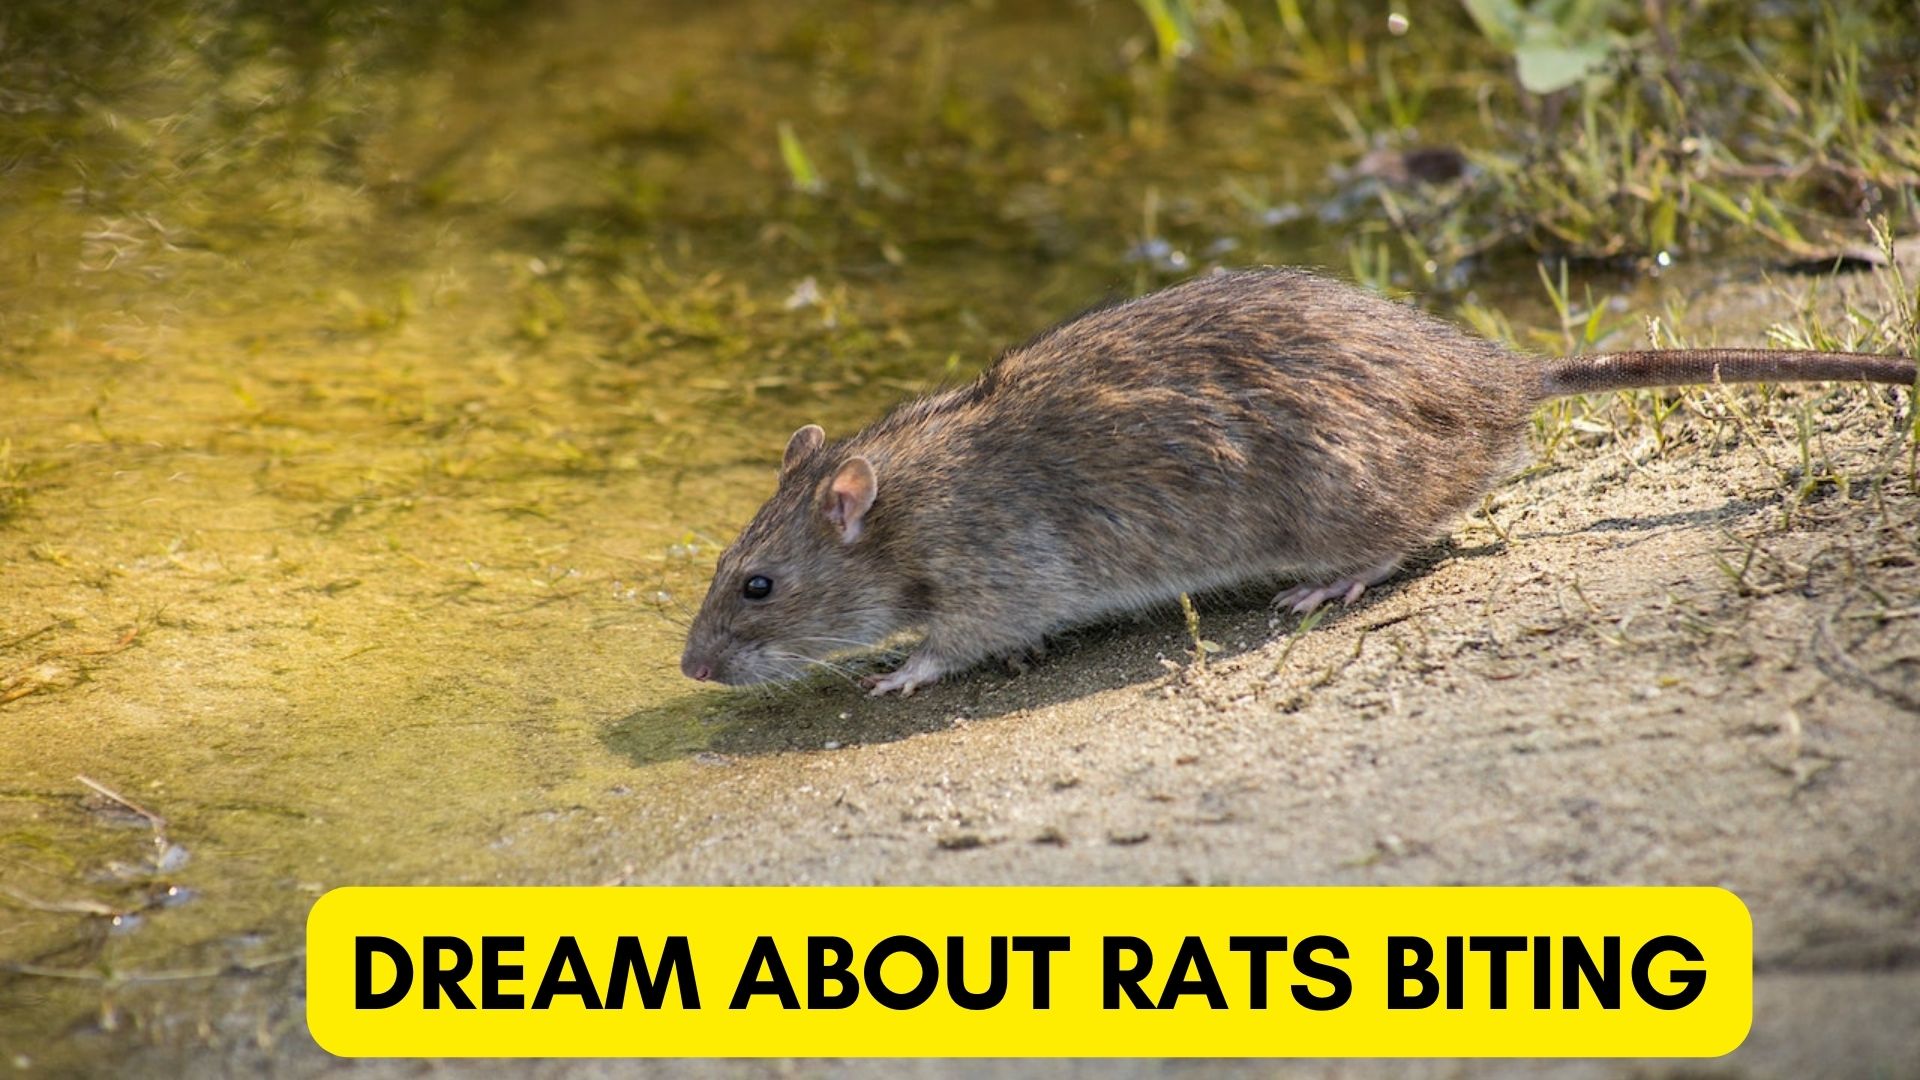 Dream About Rats Biting - New Enemies Emerging